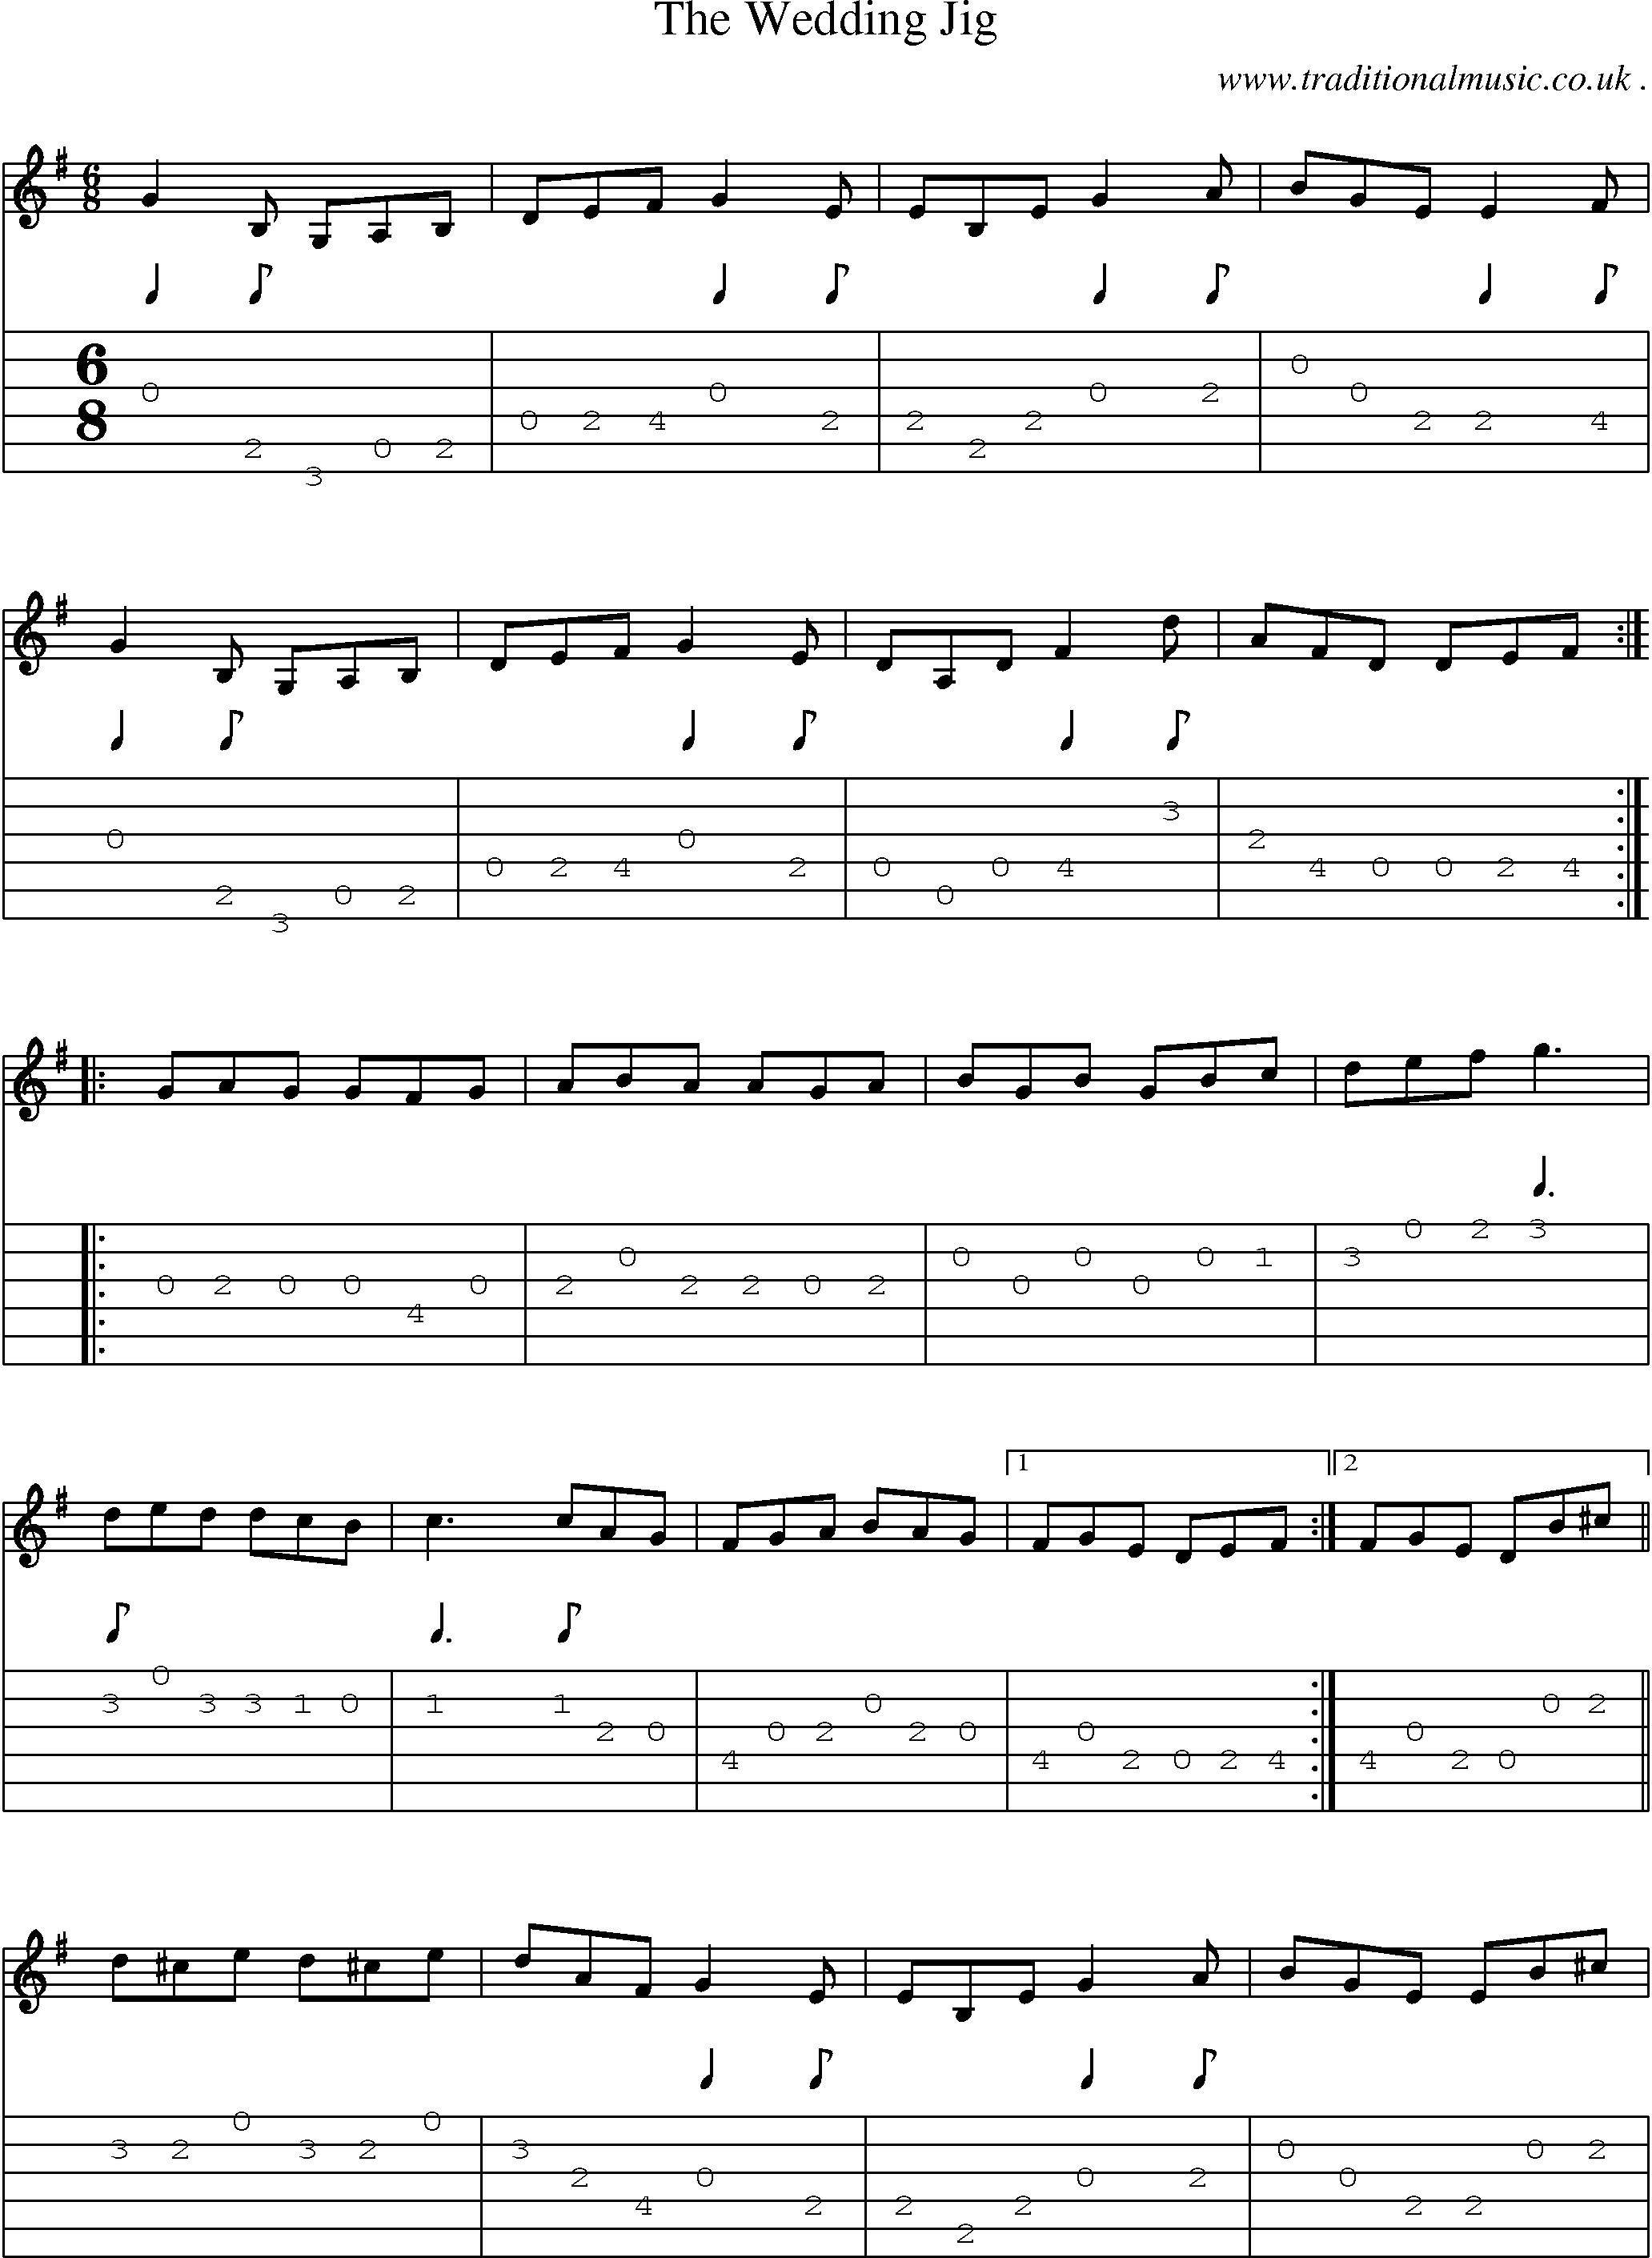 Sheet-Music and Guitar Tabs for The Wedding Jig